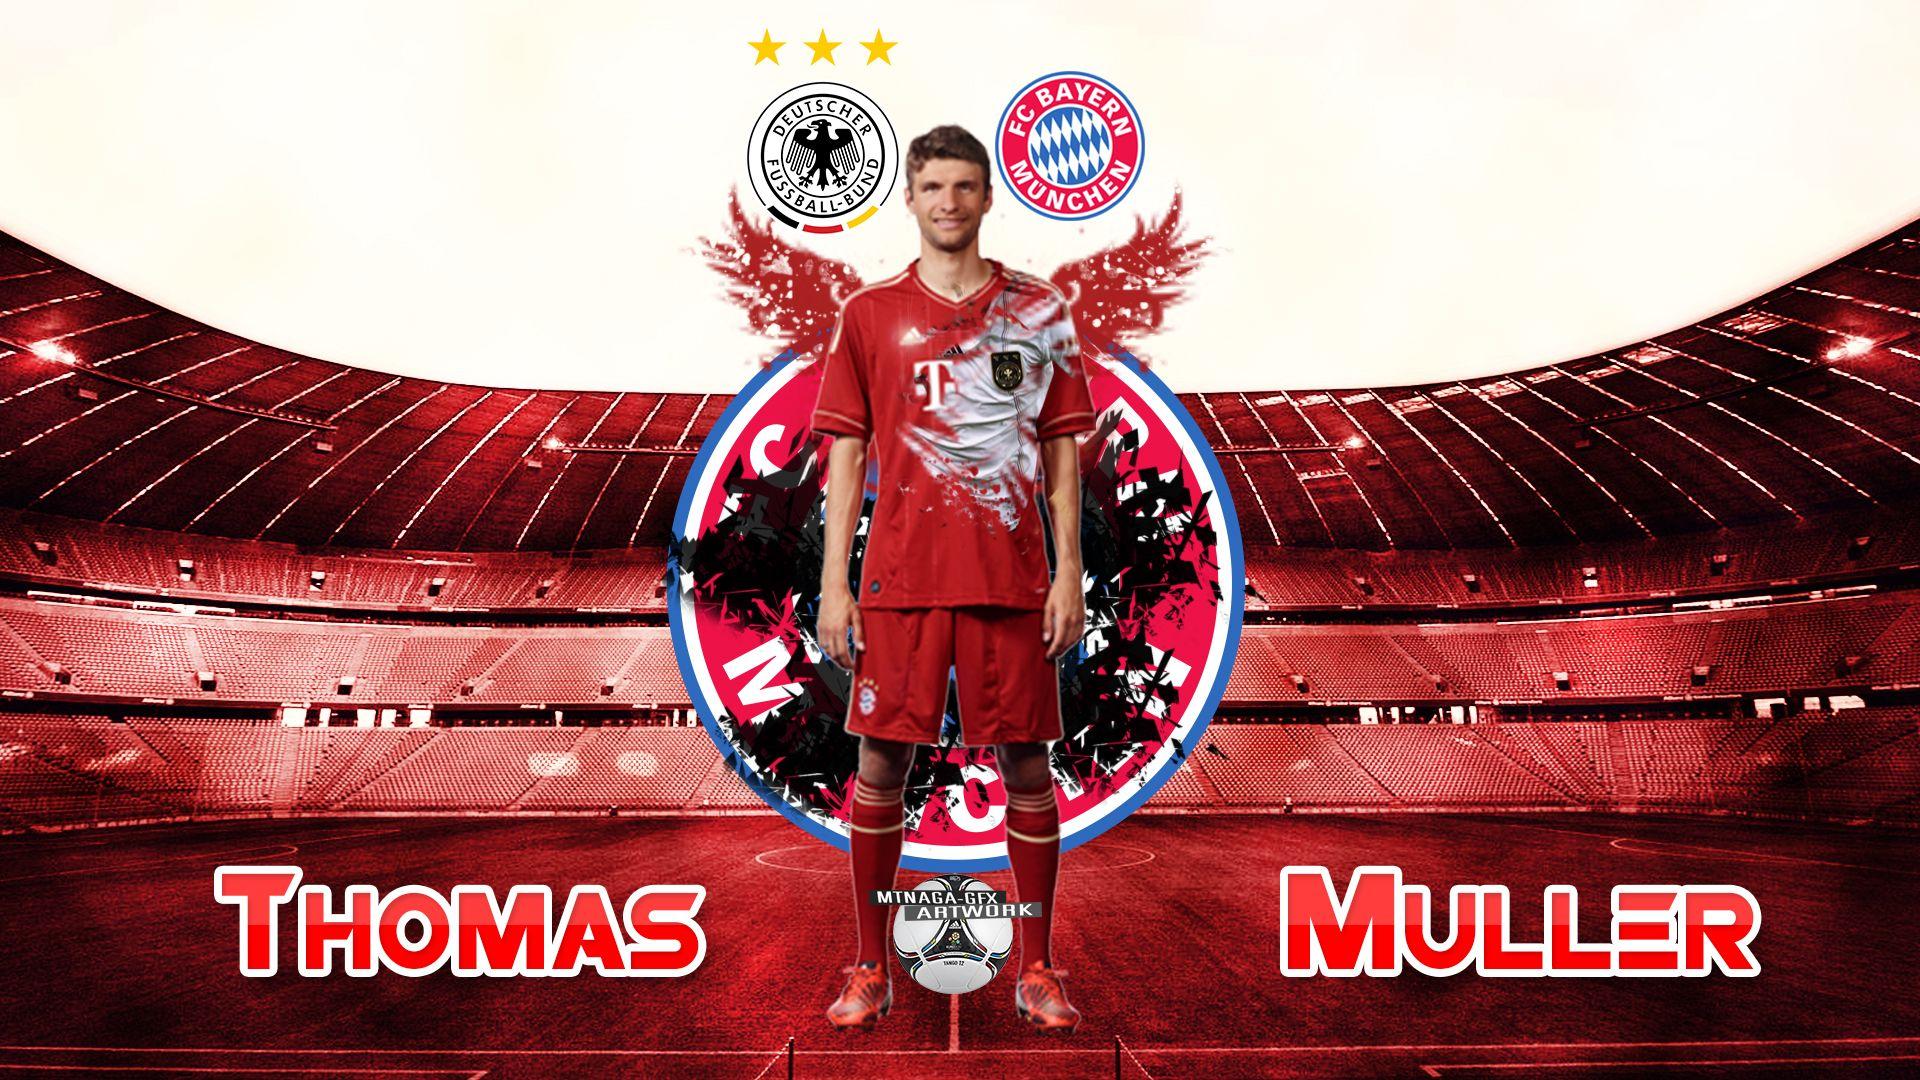 sports HD wallpaper football picture thomas muller Gallery